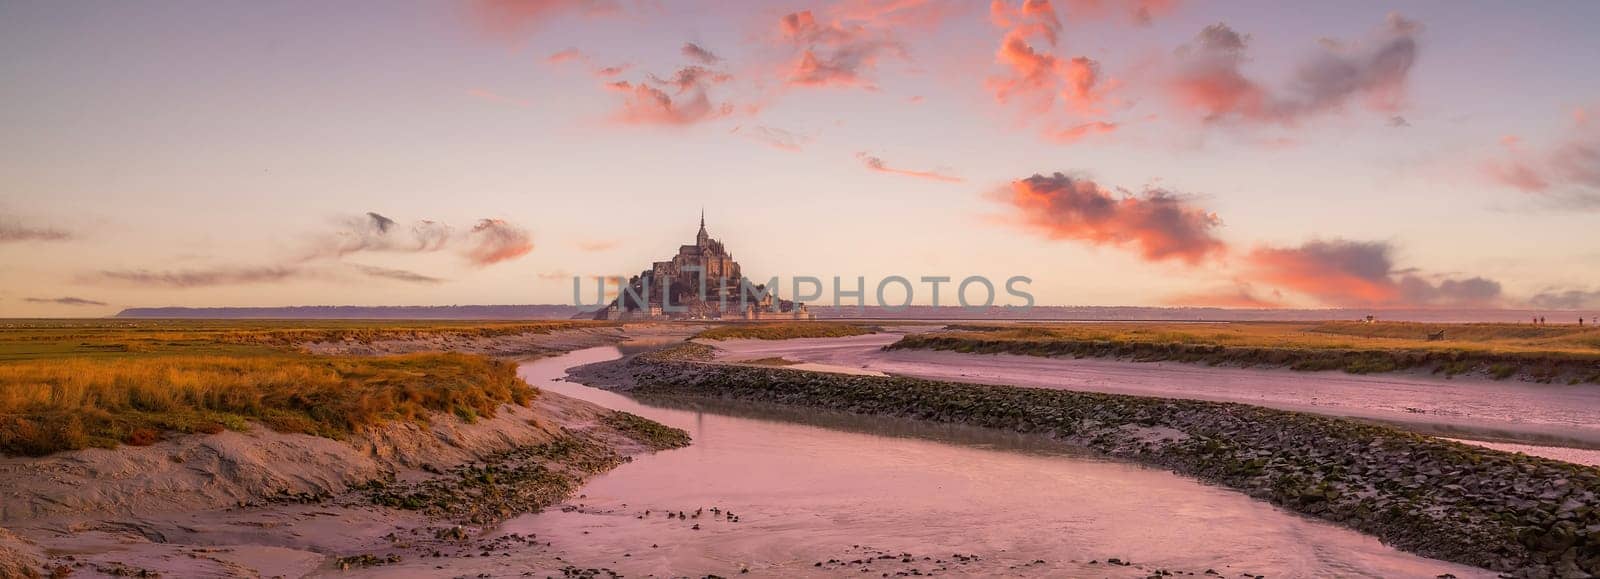 Famous Le Mont Saint-Michel tidal island in Normandy, France by f11photo